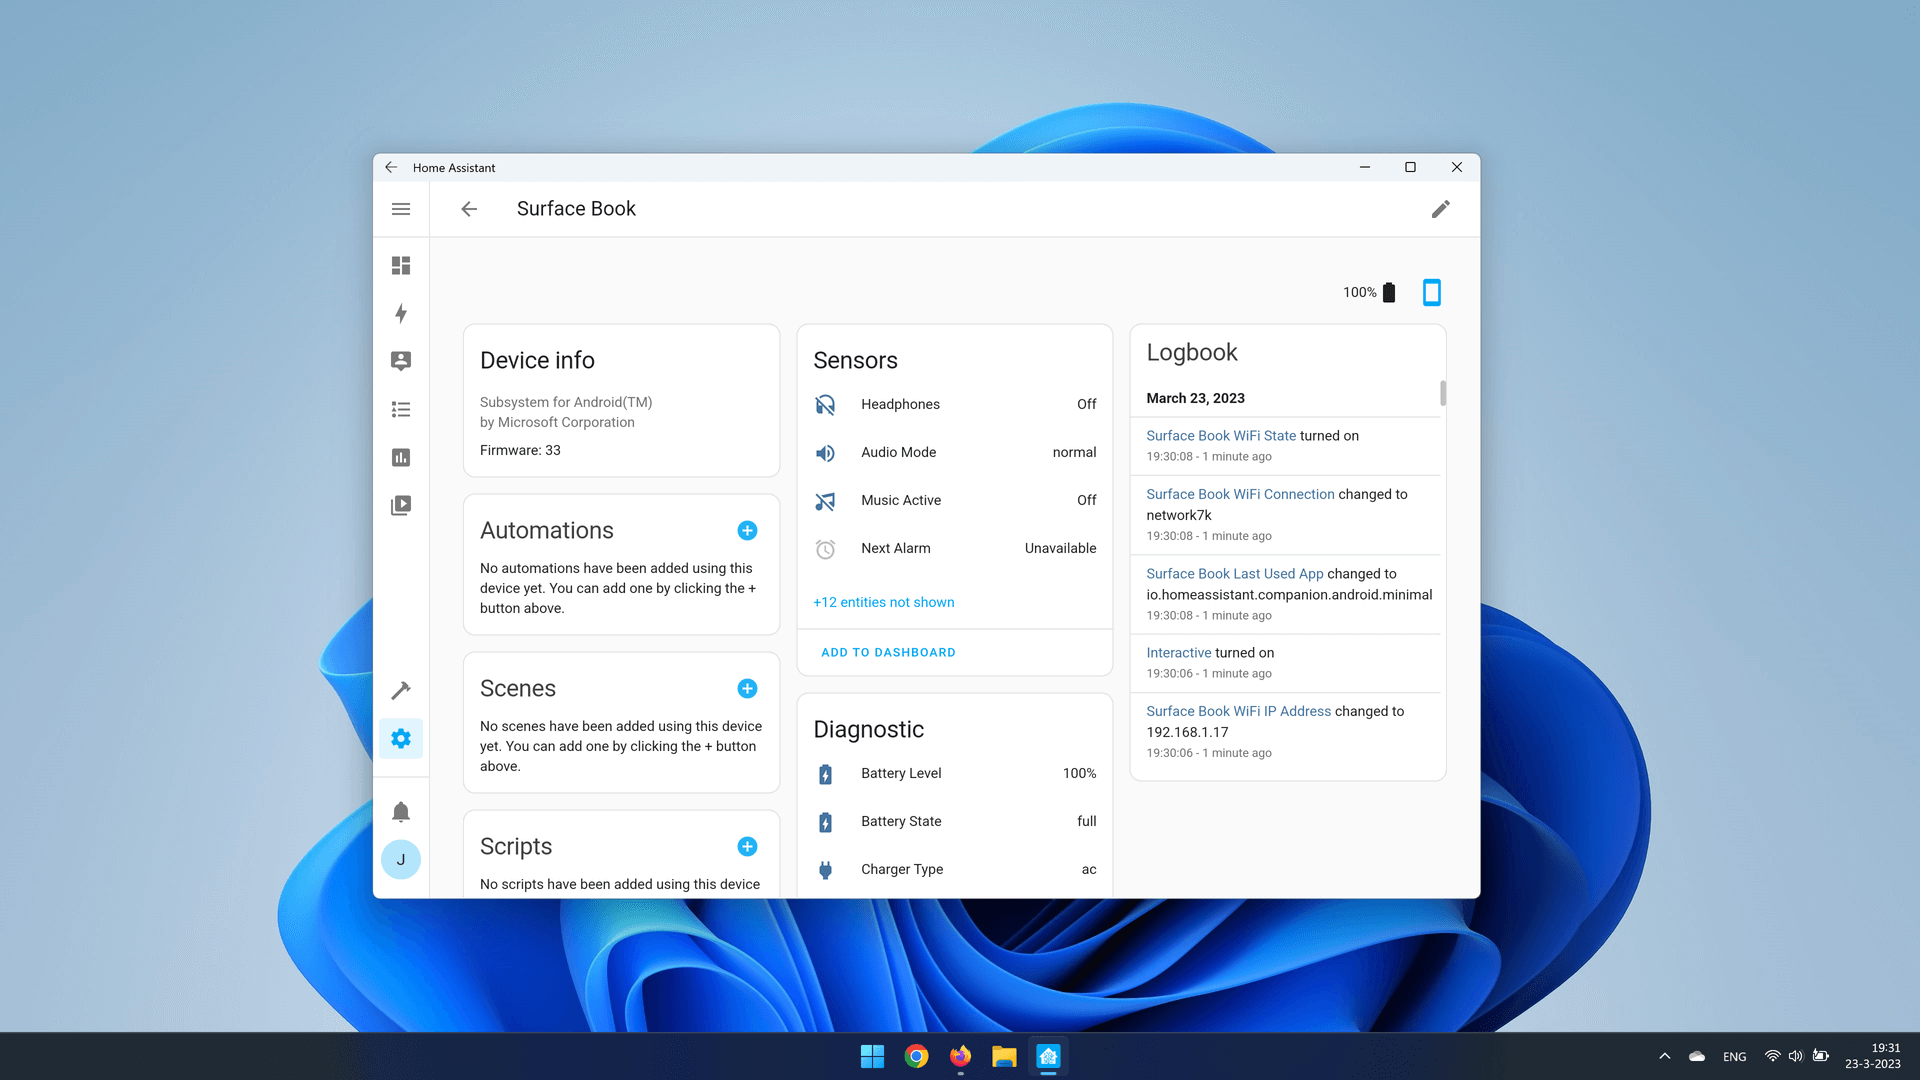 Screenshot of the Home Assistant Android app on a Windows 11 device